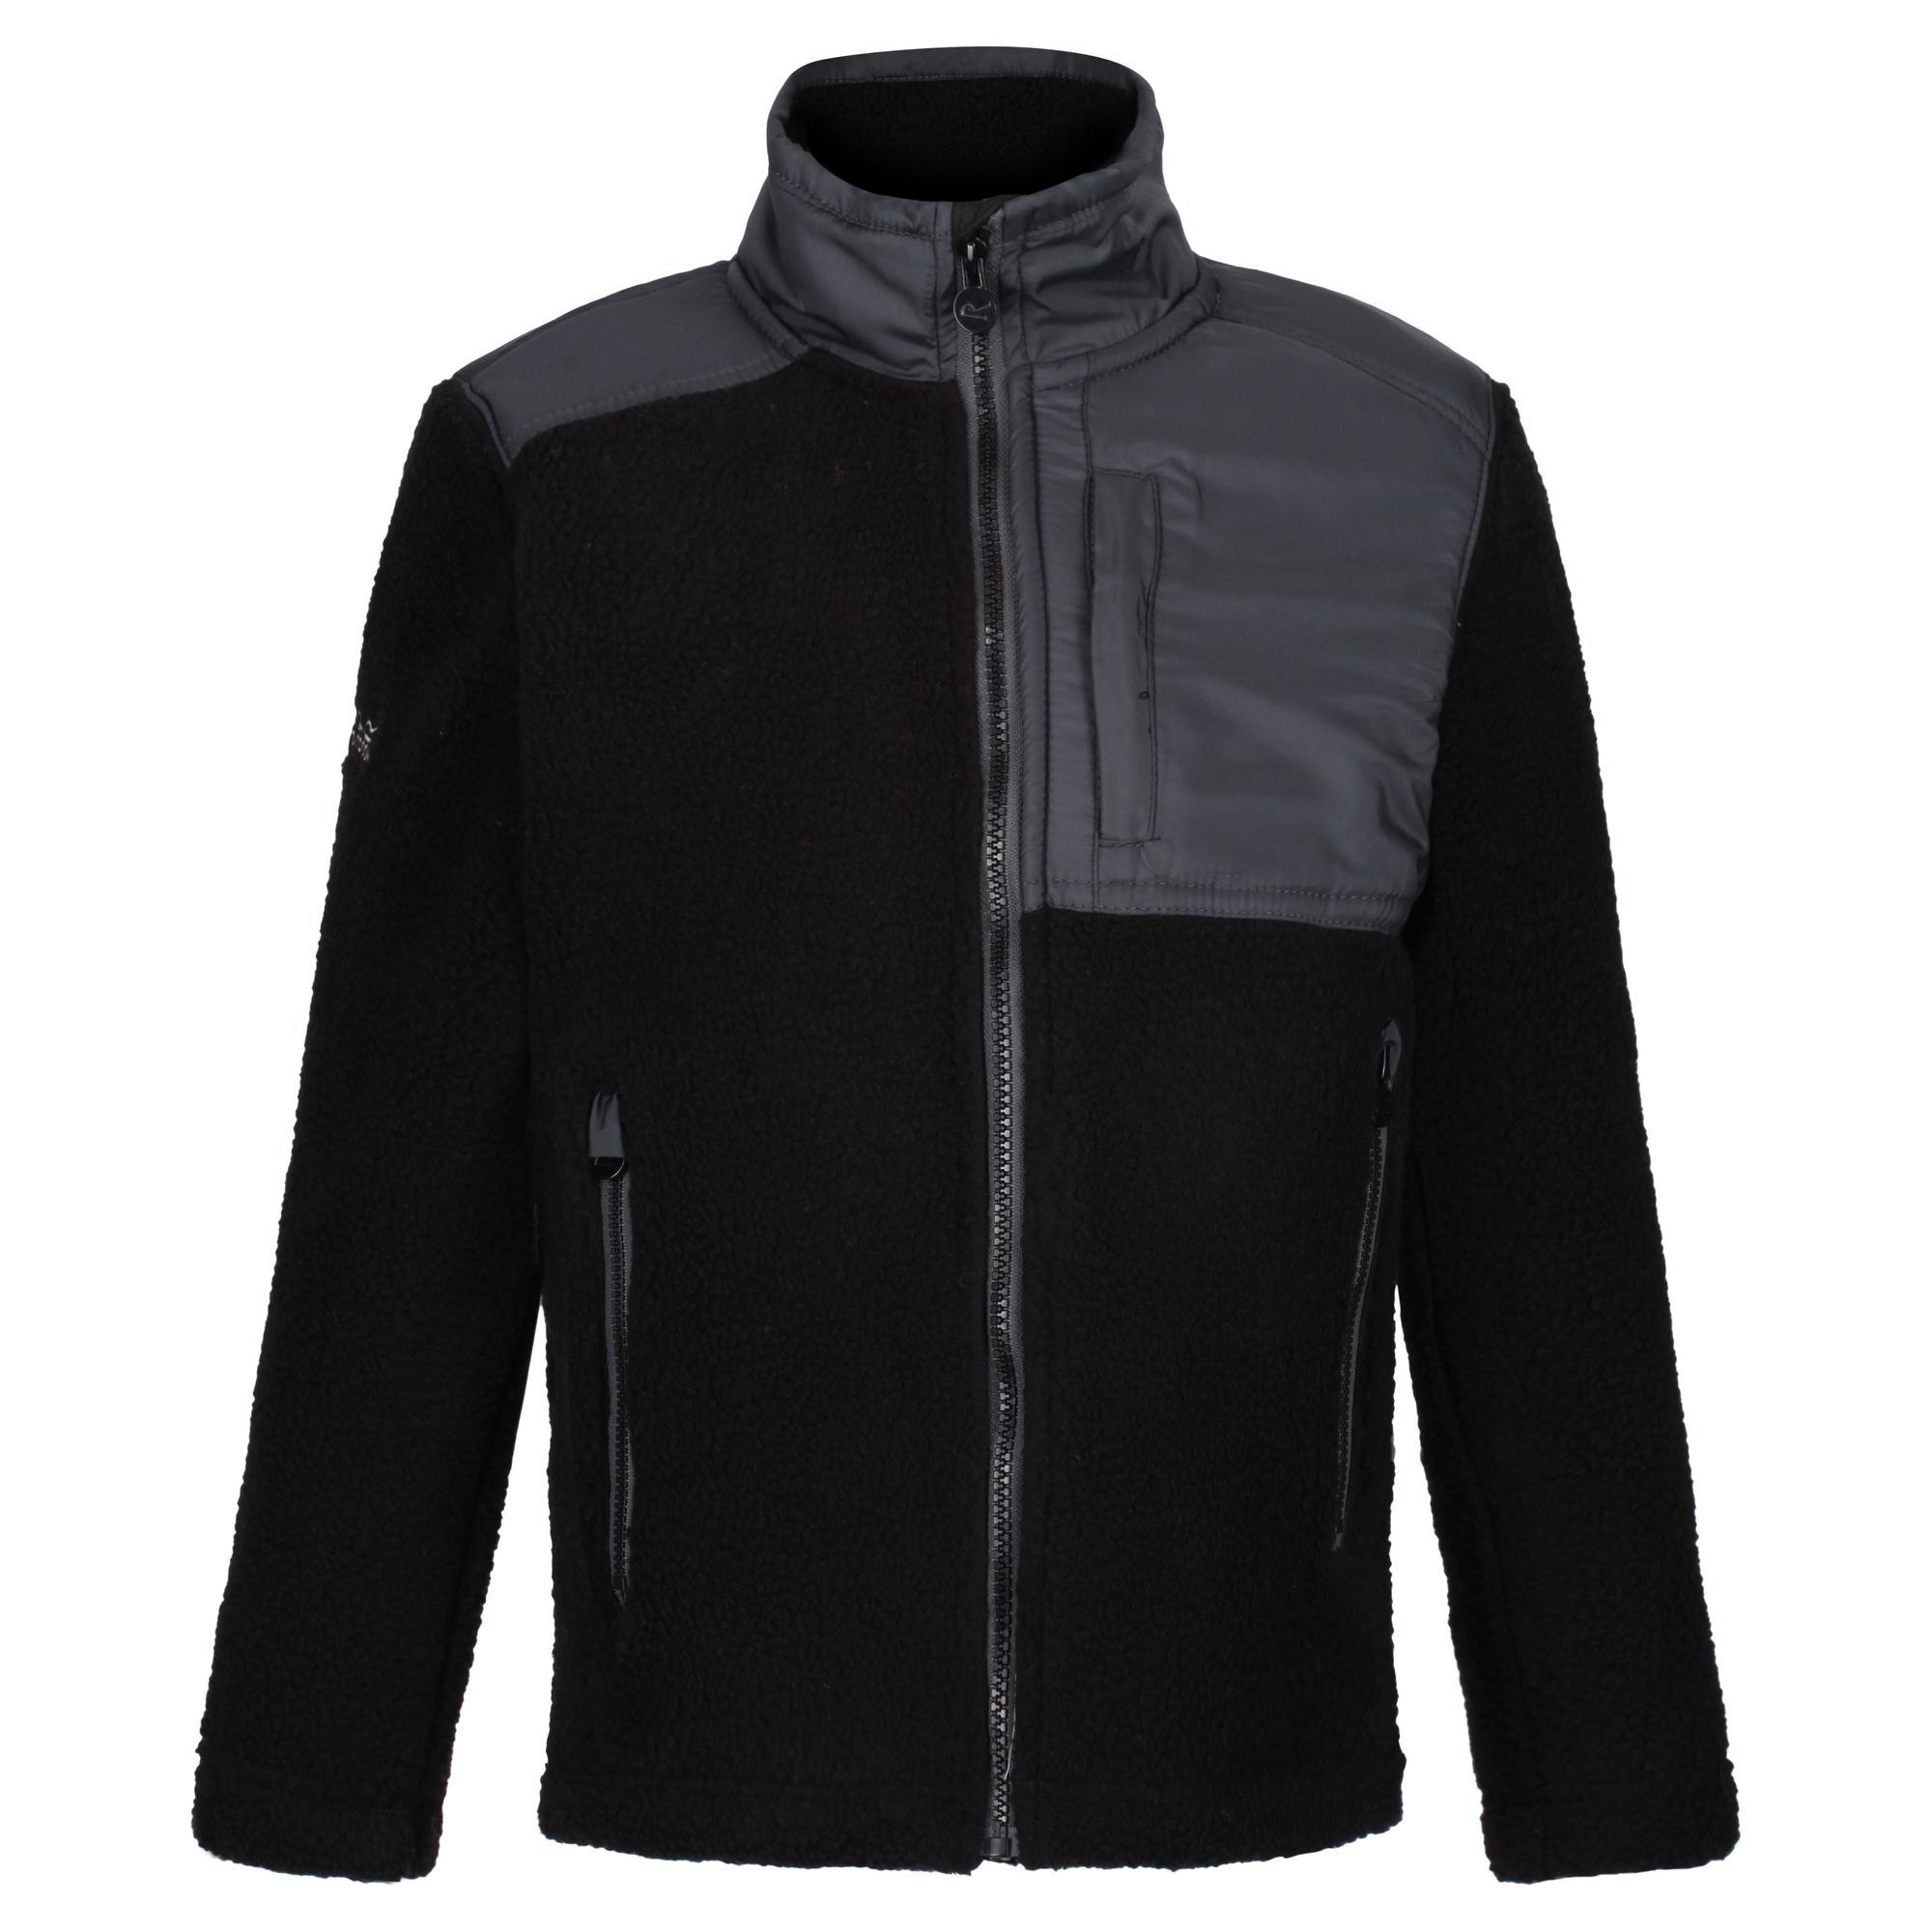 Material: 100% 350gsm polyester. Zip-through borg fleece. Provides a durable layer of warmth. With hardwearing overlays around the collar and shoulders for added durability. With the Regatta Outdoors badge on the sleeve. Features 1 zipped chest pocket and 2 zipped lower pockets. Size (height/chest): (2 Years) 92cm/53-55cm, (3-4 Years) 98-104cm/55-57cm, (5-6 Years) 110-116cm/59-61cm, (7-8 Years) 122-128cm/63-67cm, (9-10 Years) 135-140cm/69-73cm, (11-12 Years) 146-152cm/75-79cm, (13 Years) 153-158cm/82cm, (14 Years) 164-170cm/86cm, (15-16 Years) 170-176cm/89-92cm.